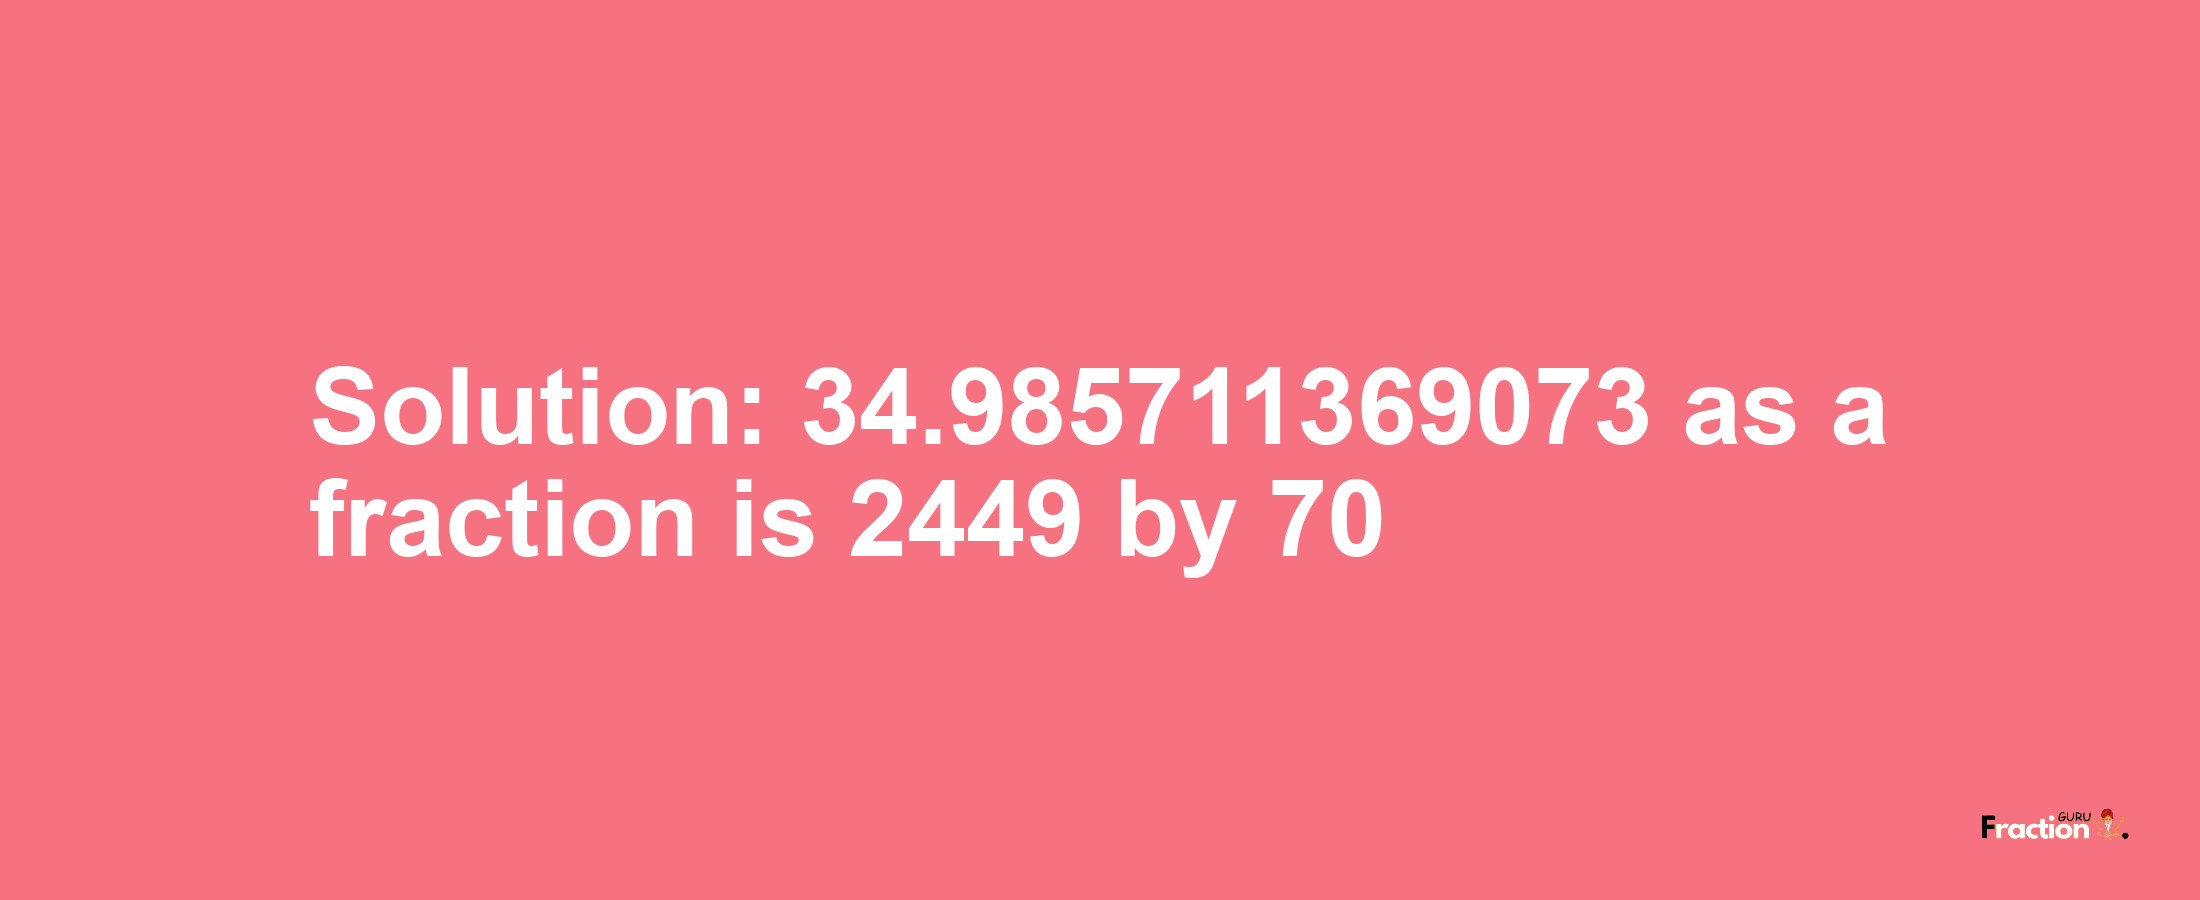 Solution:34.985711369073 as a fraction is 2449/70